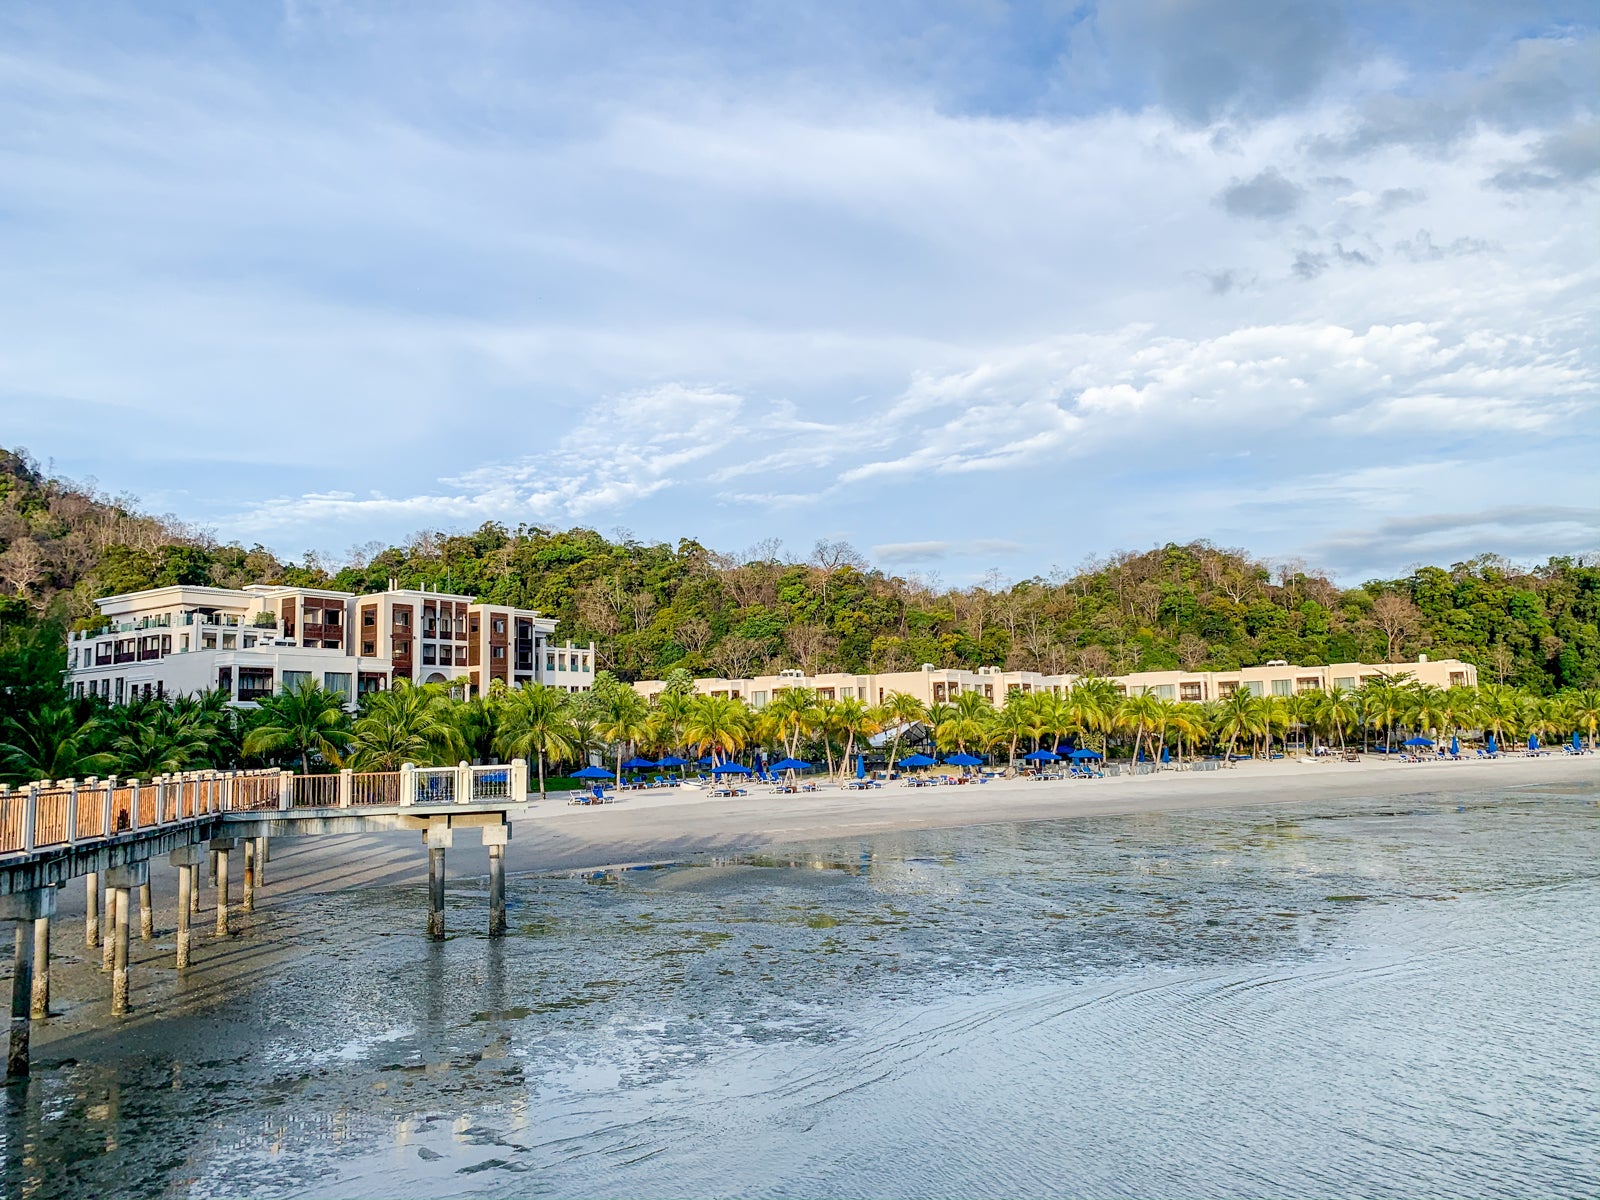 The Marriott Gold status provided by the Platinum Card might get you an upgrade at Marriott properties like the St. Regis Langkawi (Photo by Ethan Steinberg/The Points Guy)